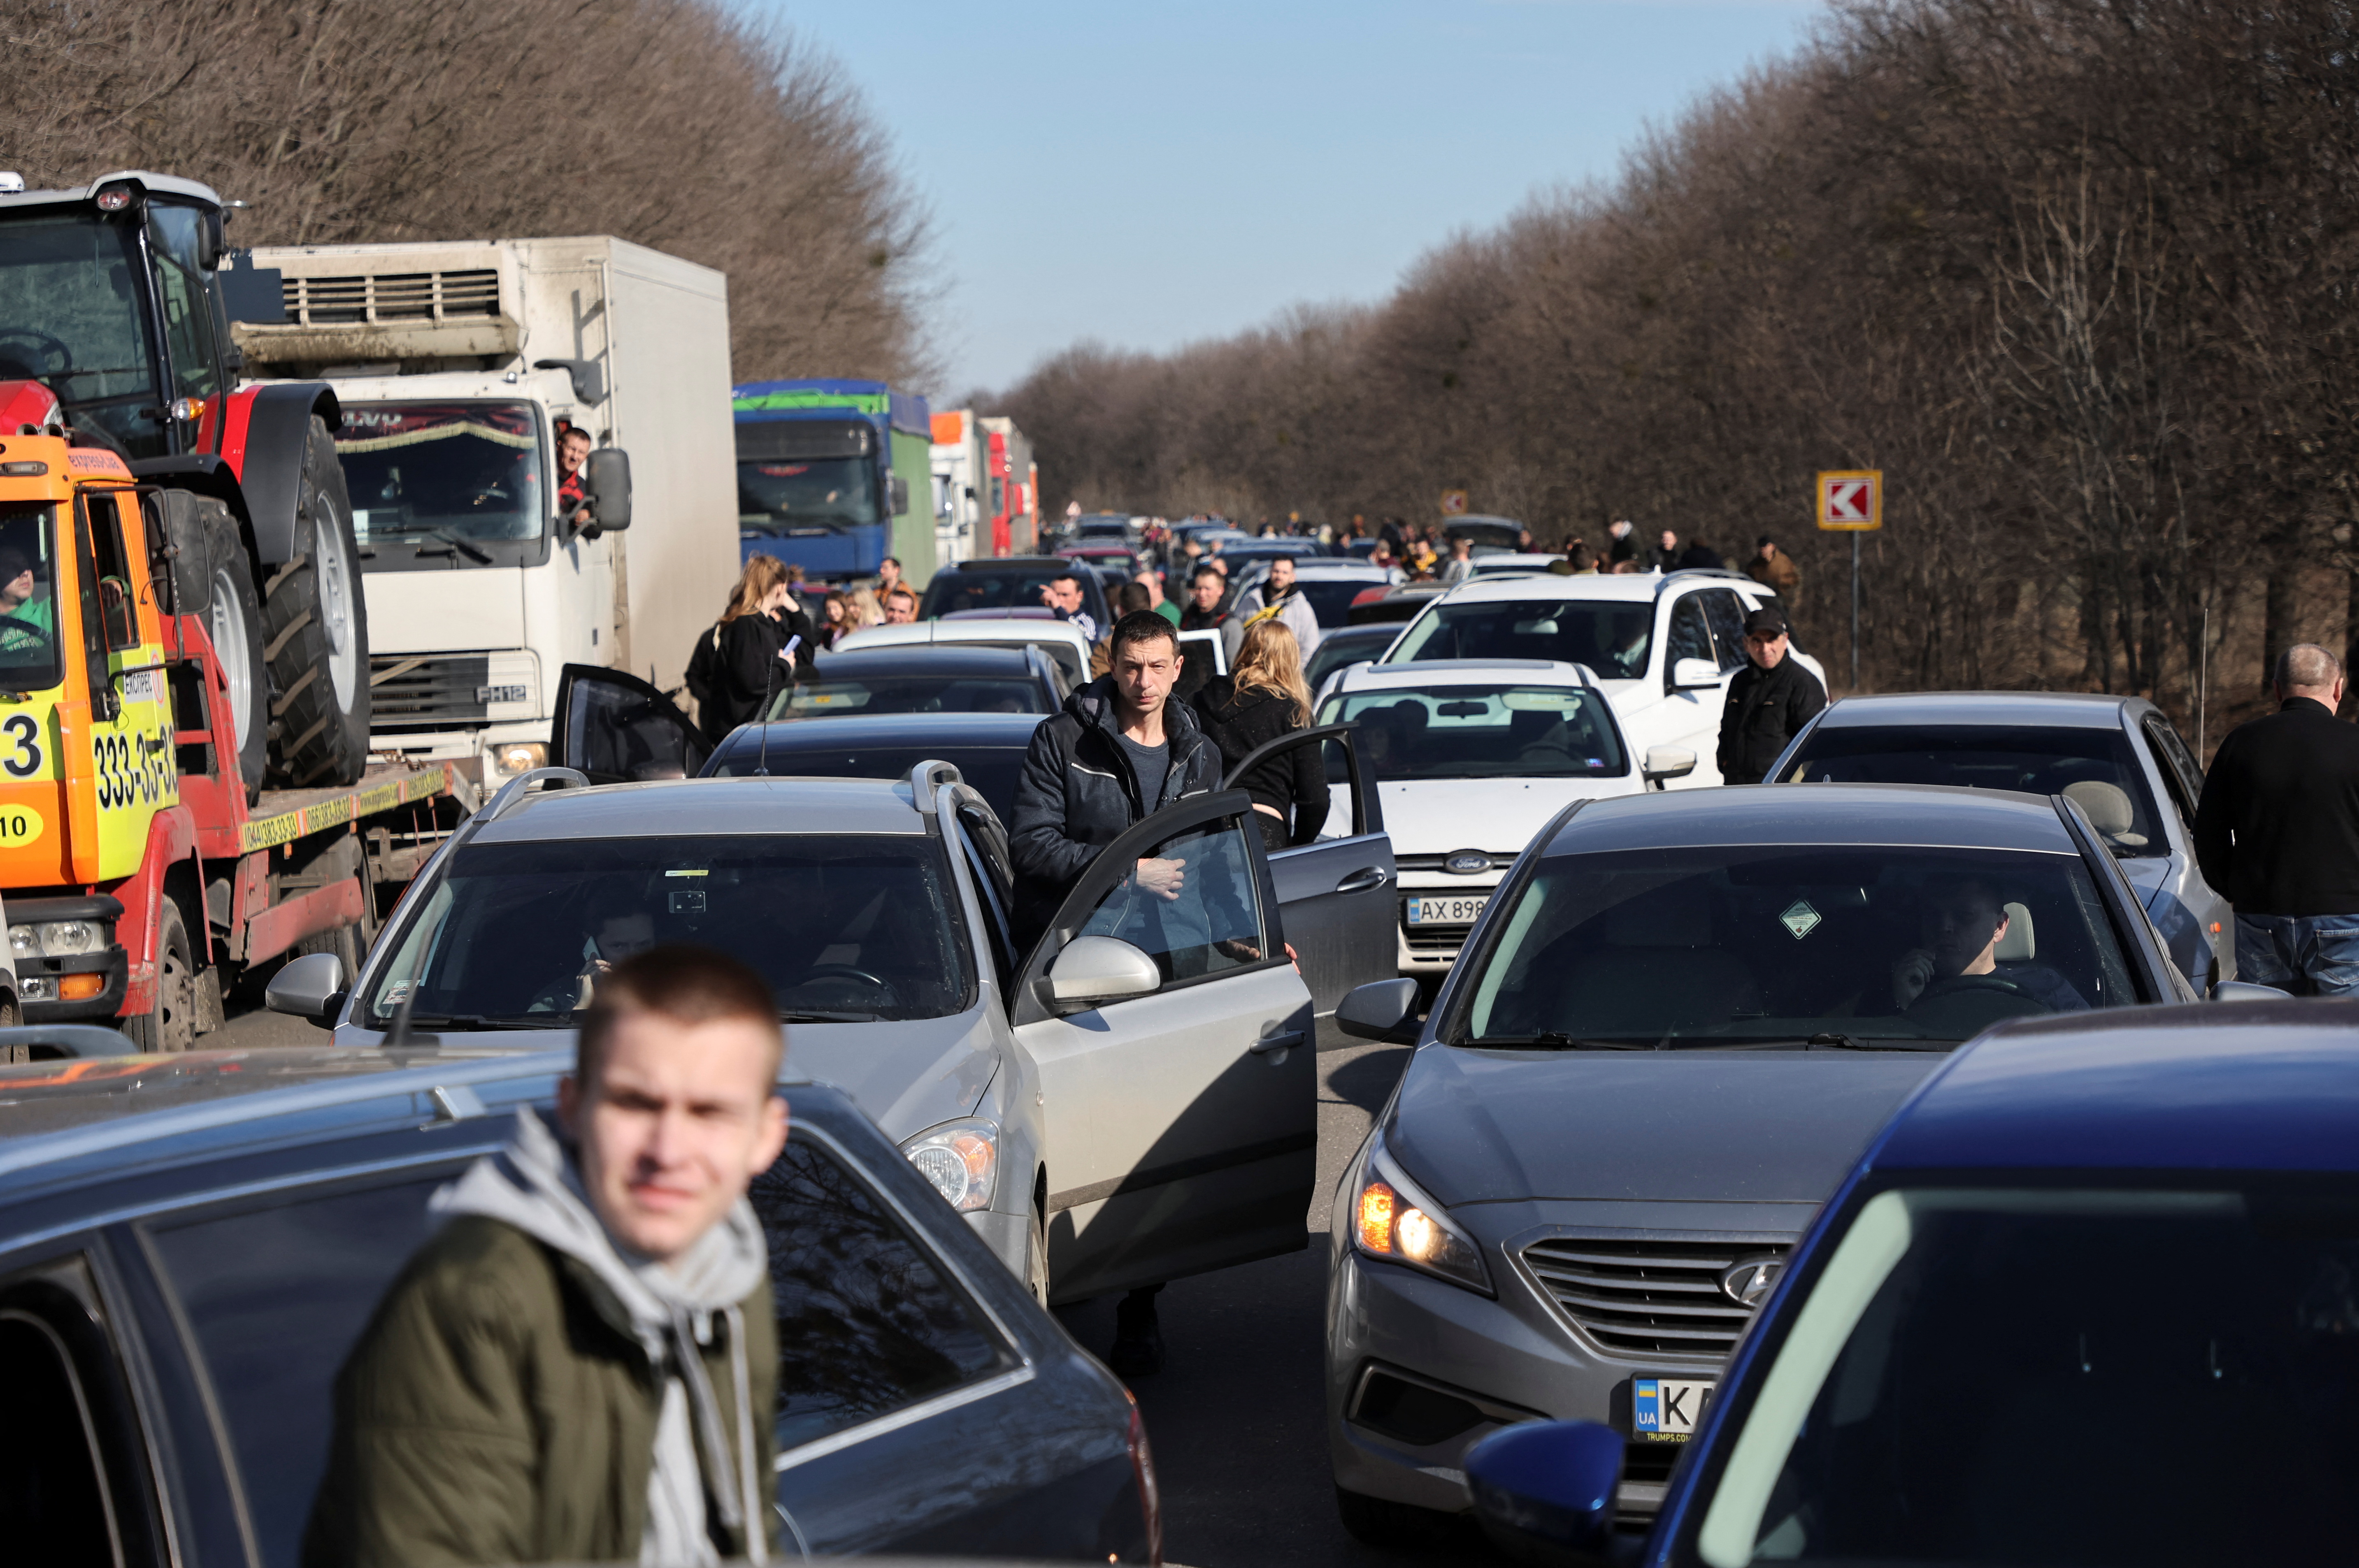 People wait in a traffic jam as they leave the city of Kharkiv, after Russian President Vladimir Putin authorised a military operation in eastern Ukraine, in Kharkiv region, Ukraine February 24, 2022. REUTERS/Antonio Bronic